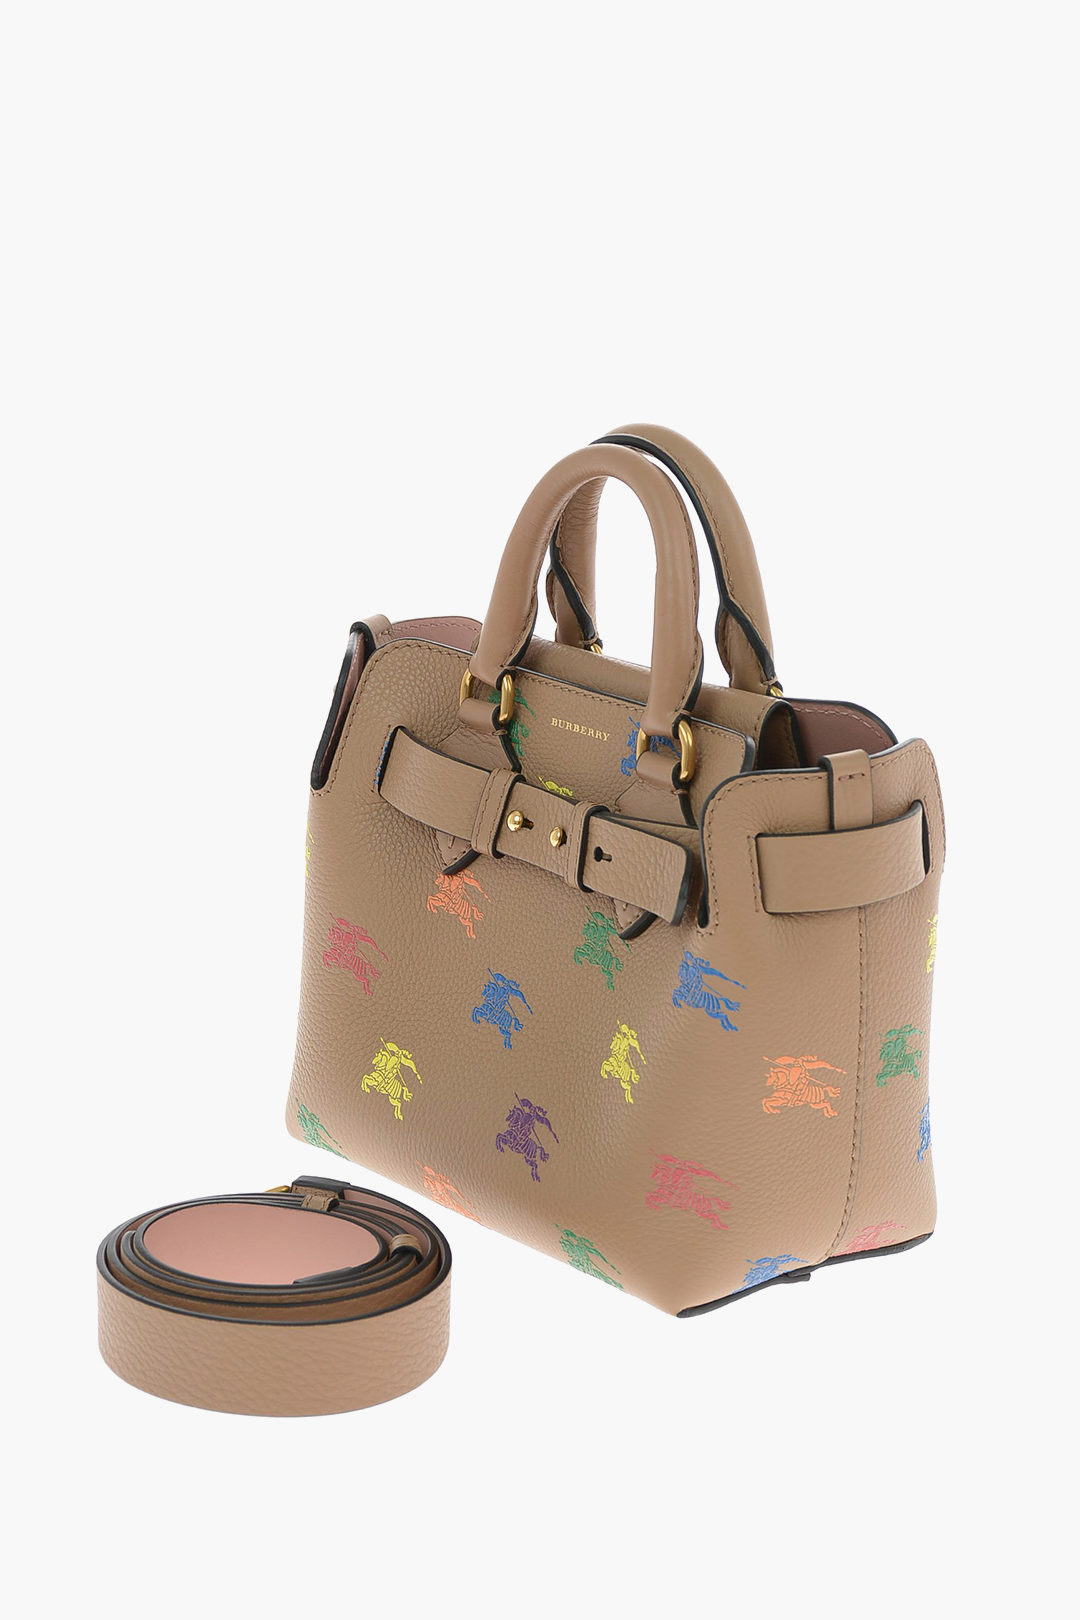 HORSE RAINBOW Printed Leather BABY BELT Tote Bag